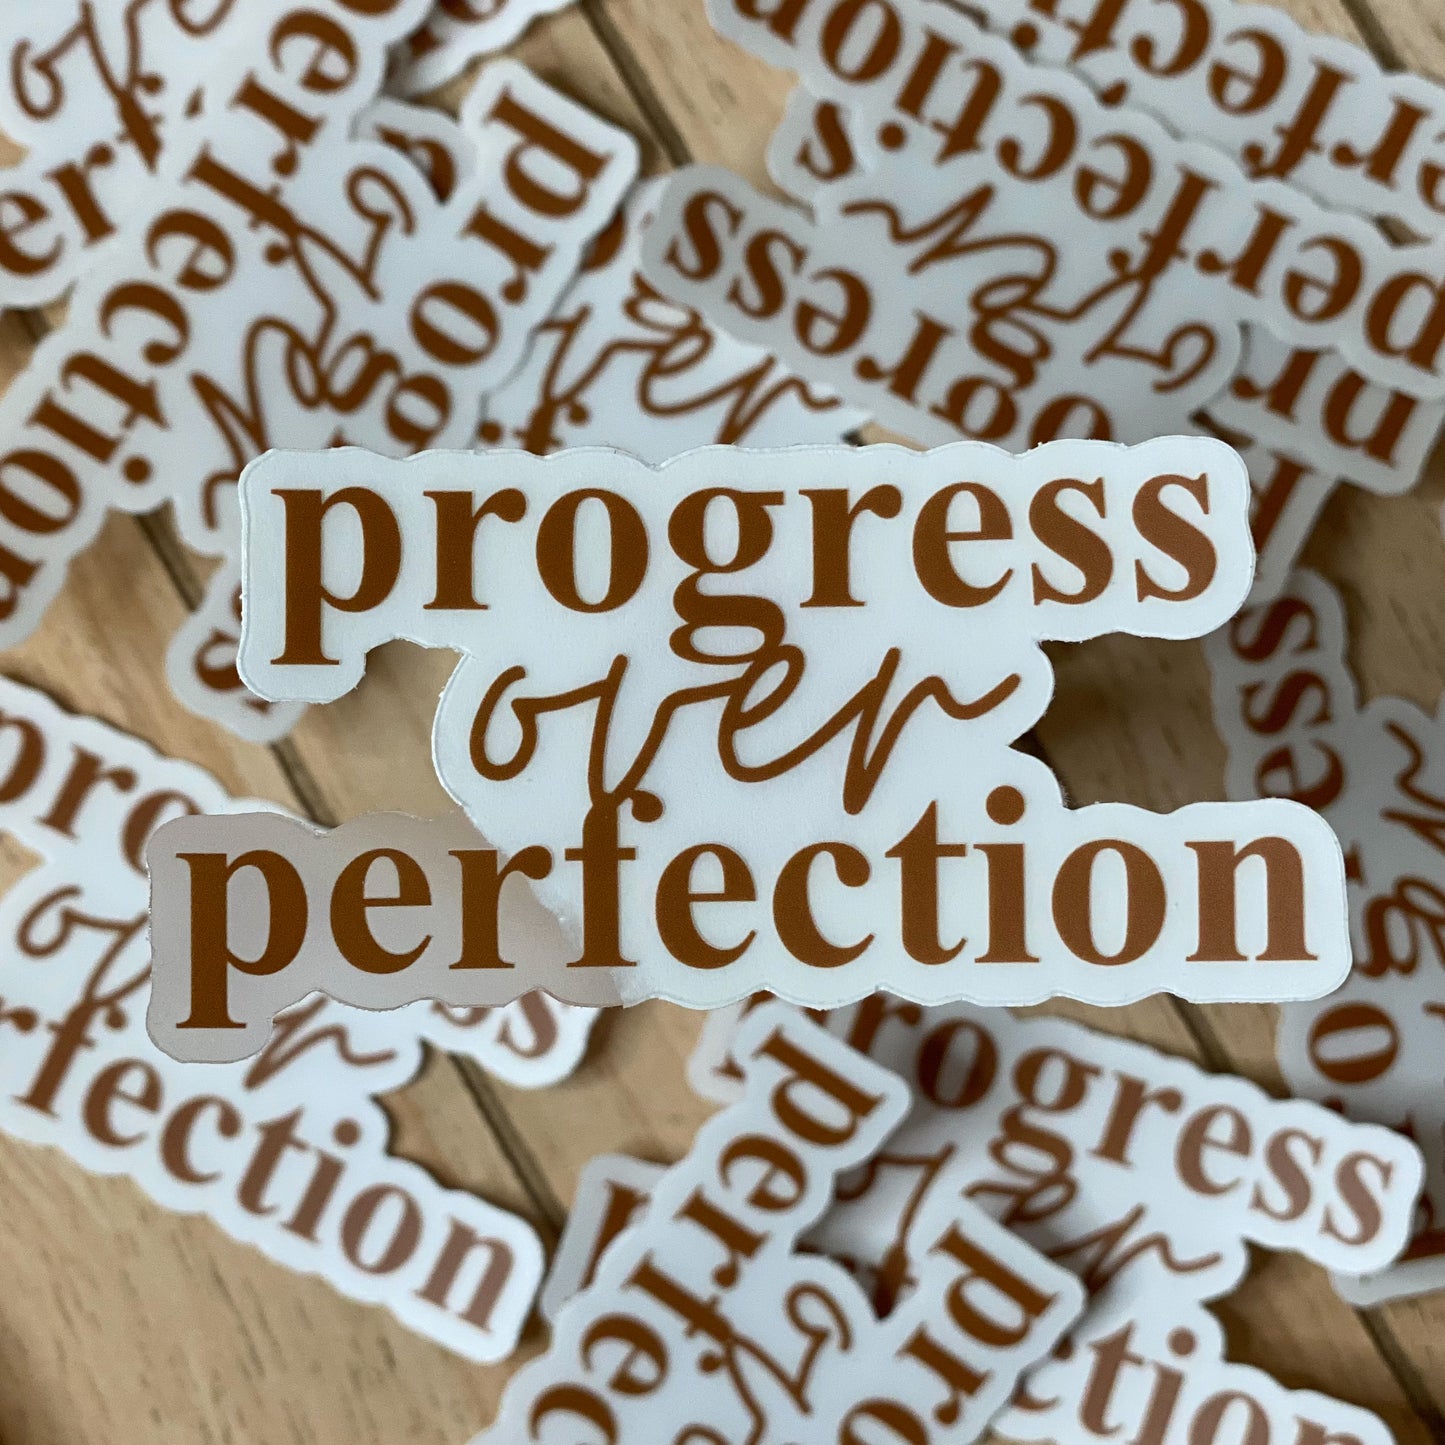 Clear Progress over Perfection